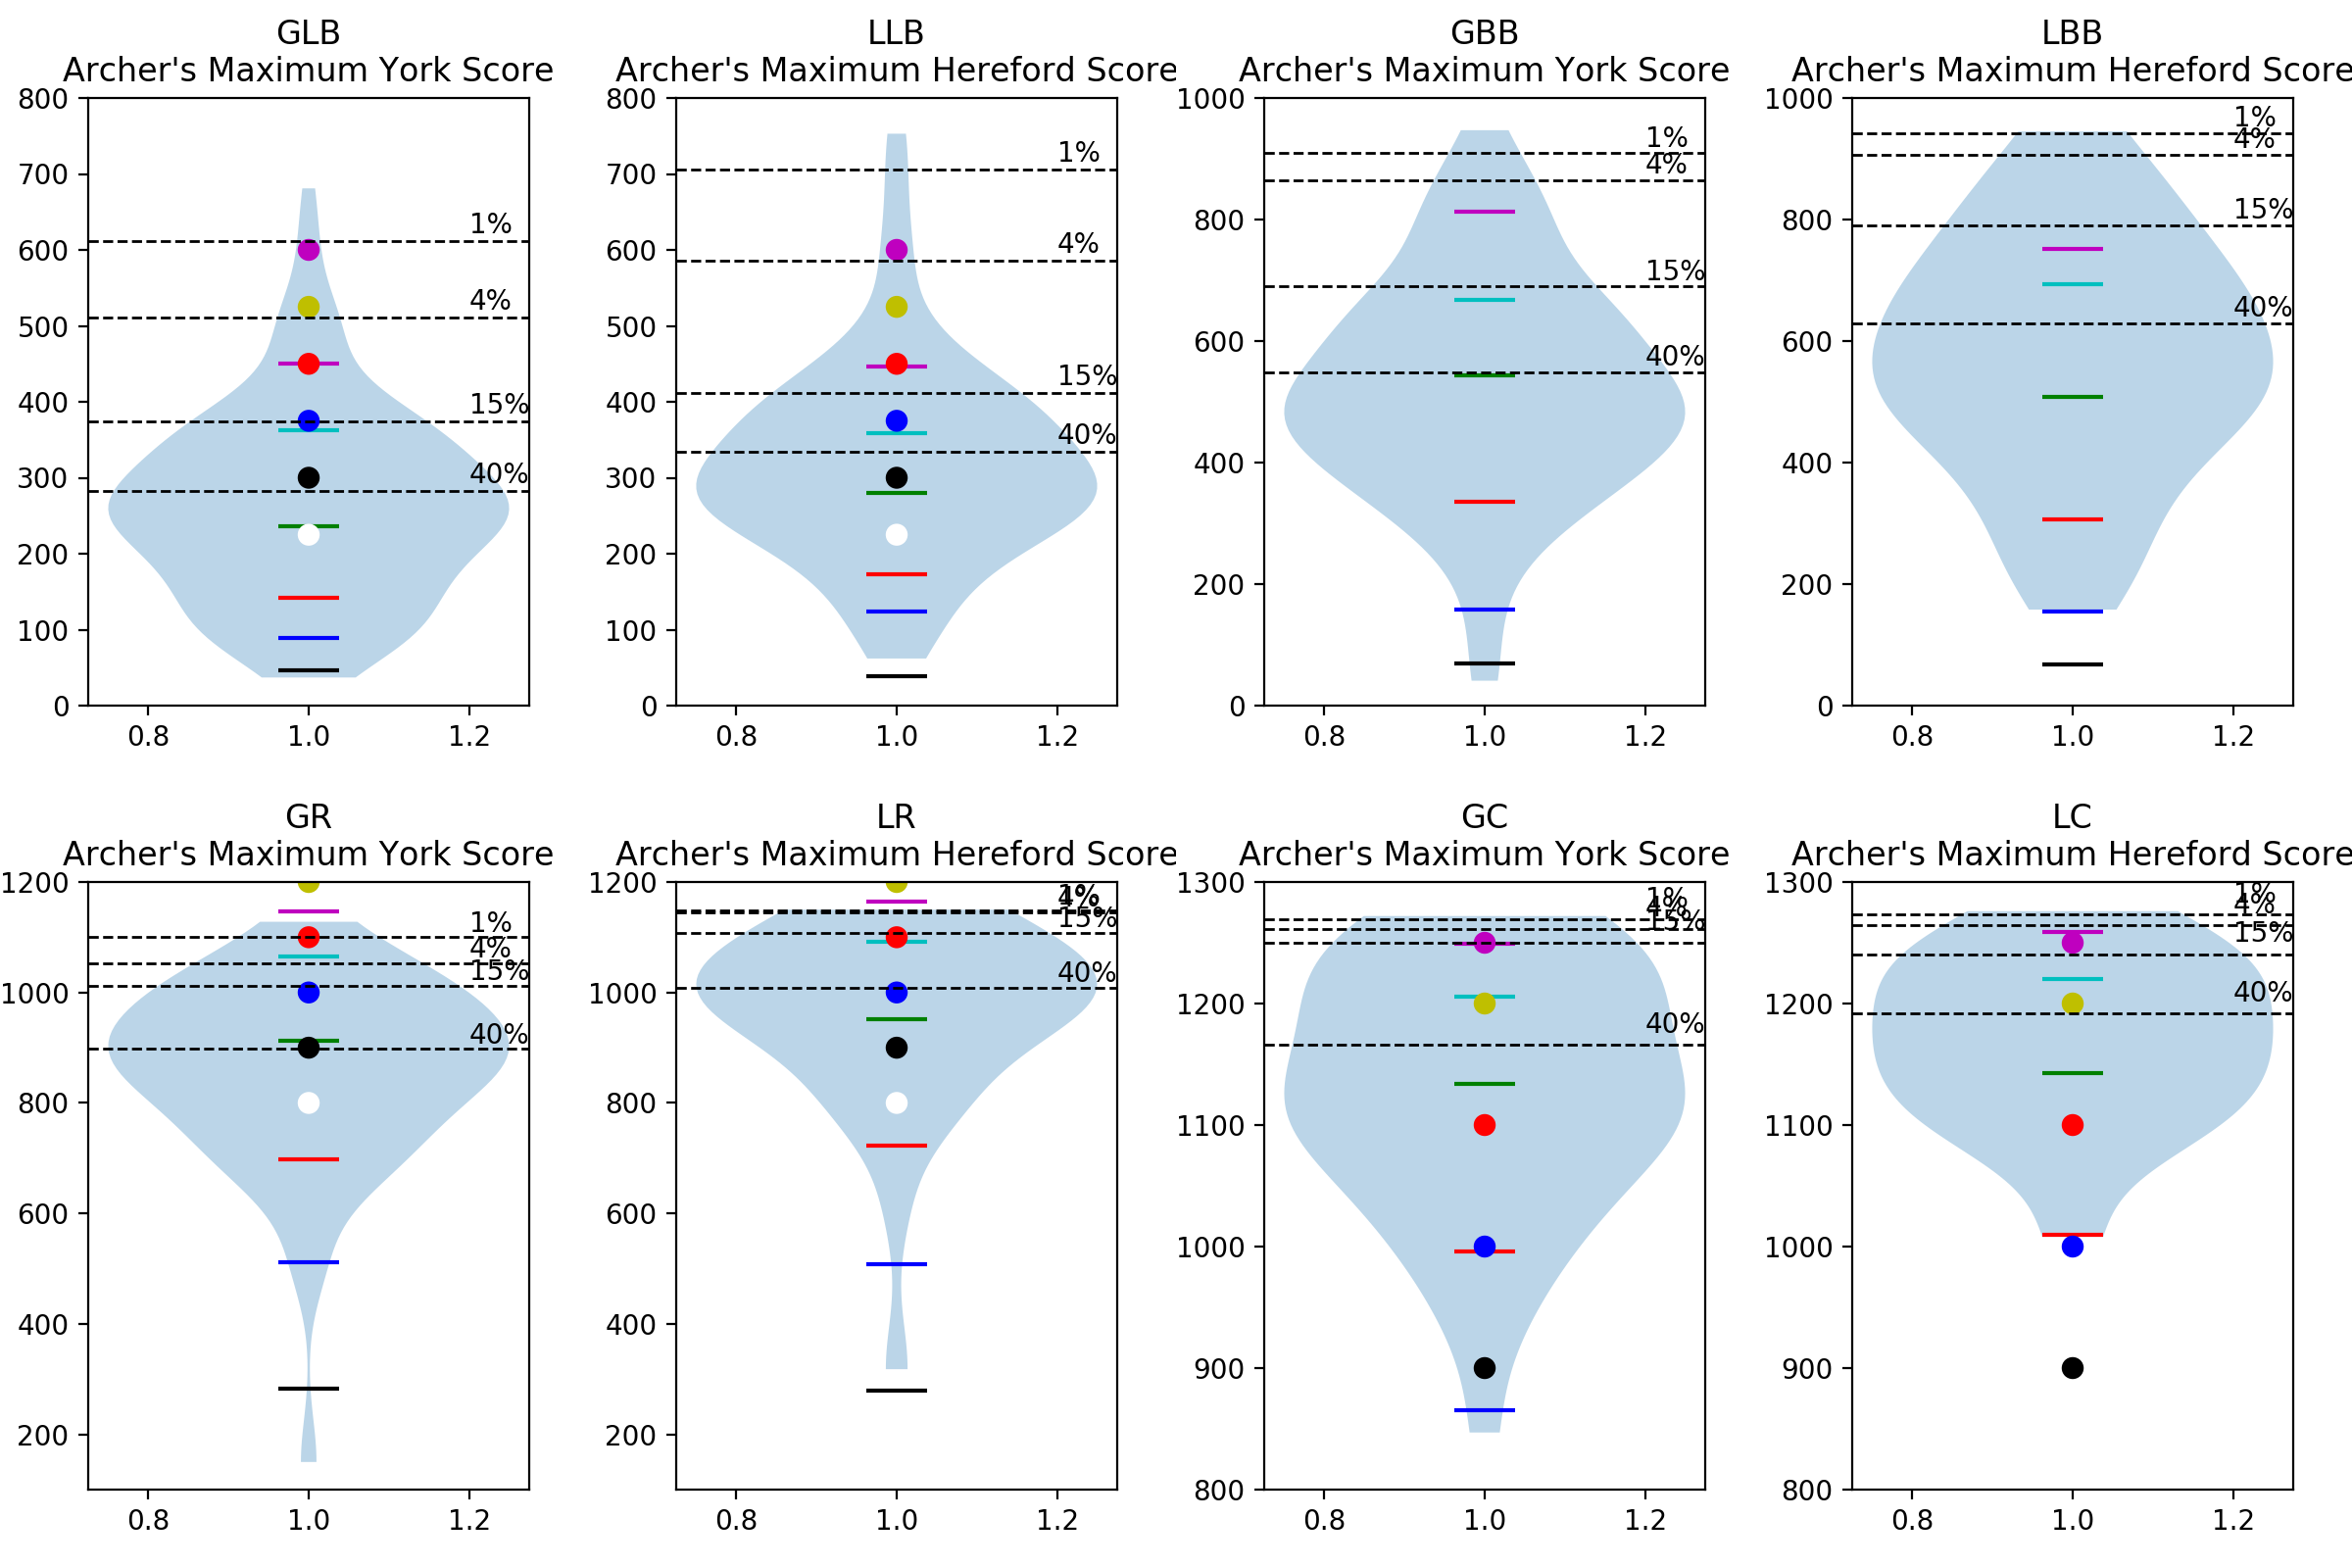 Plot 3: Violin plots of score distributions showing classifications, Rose awards, and percentiles.